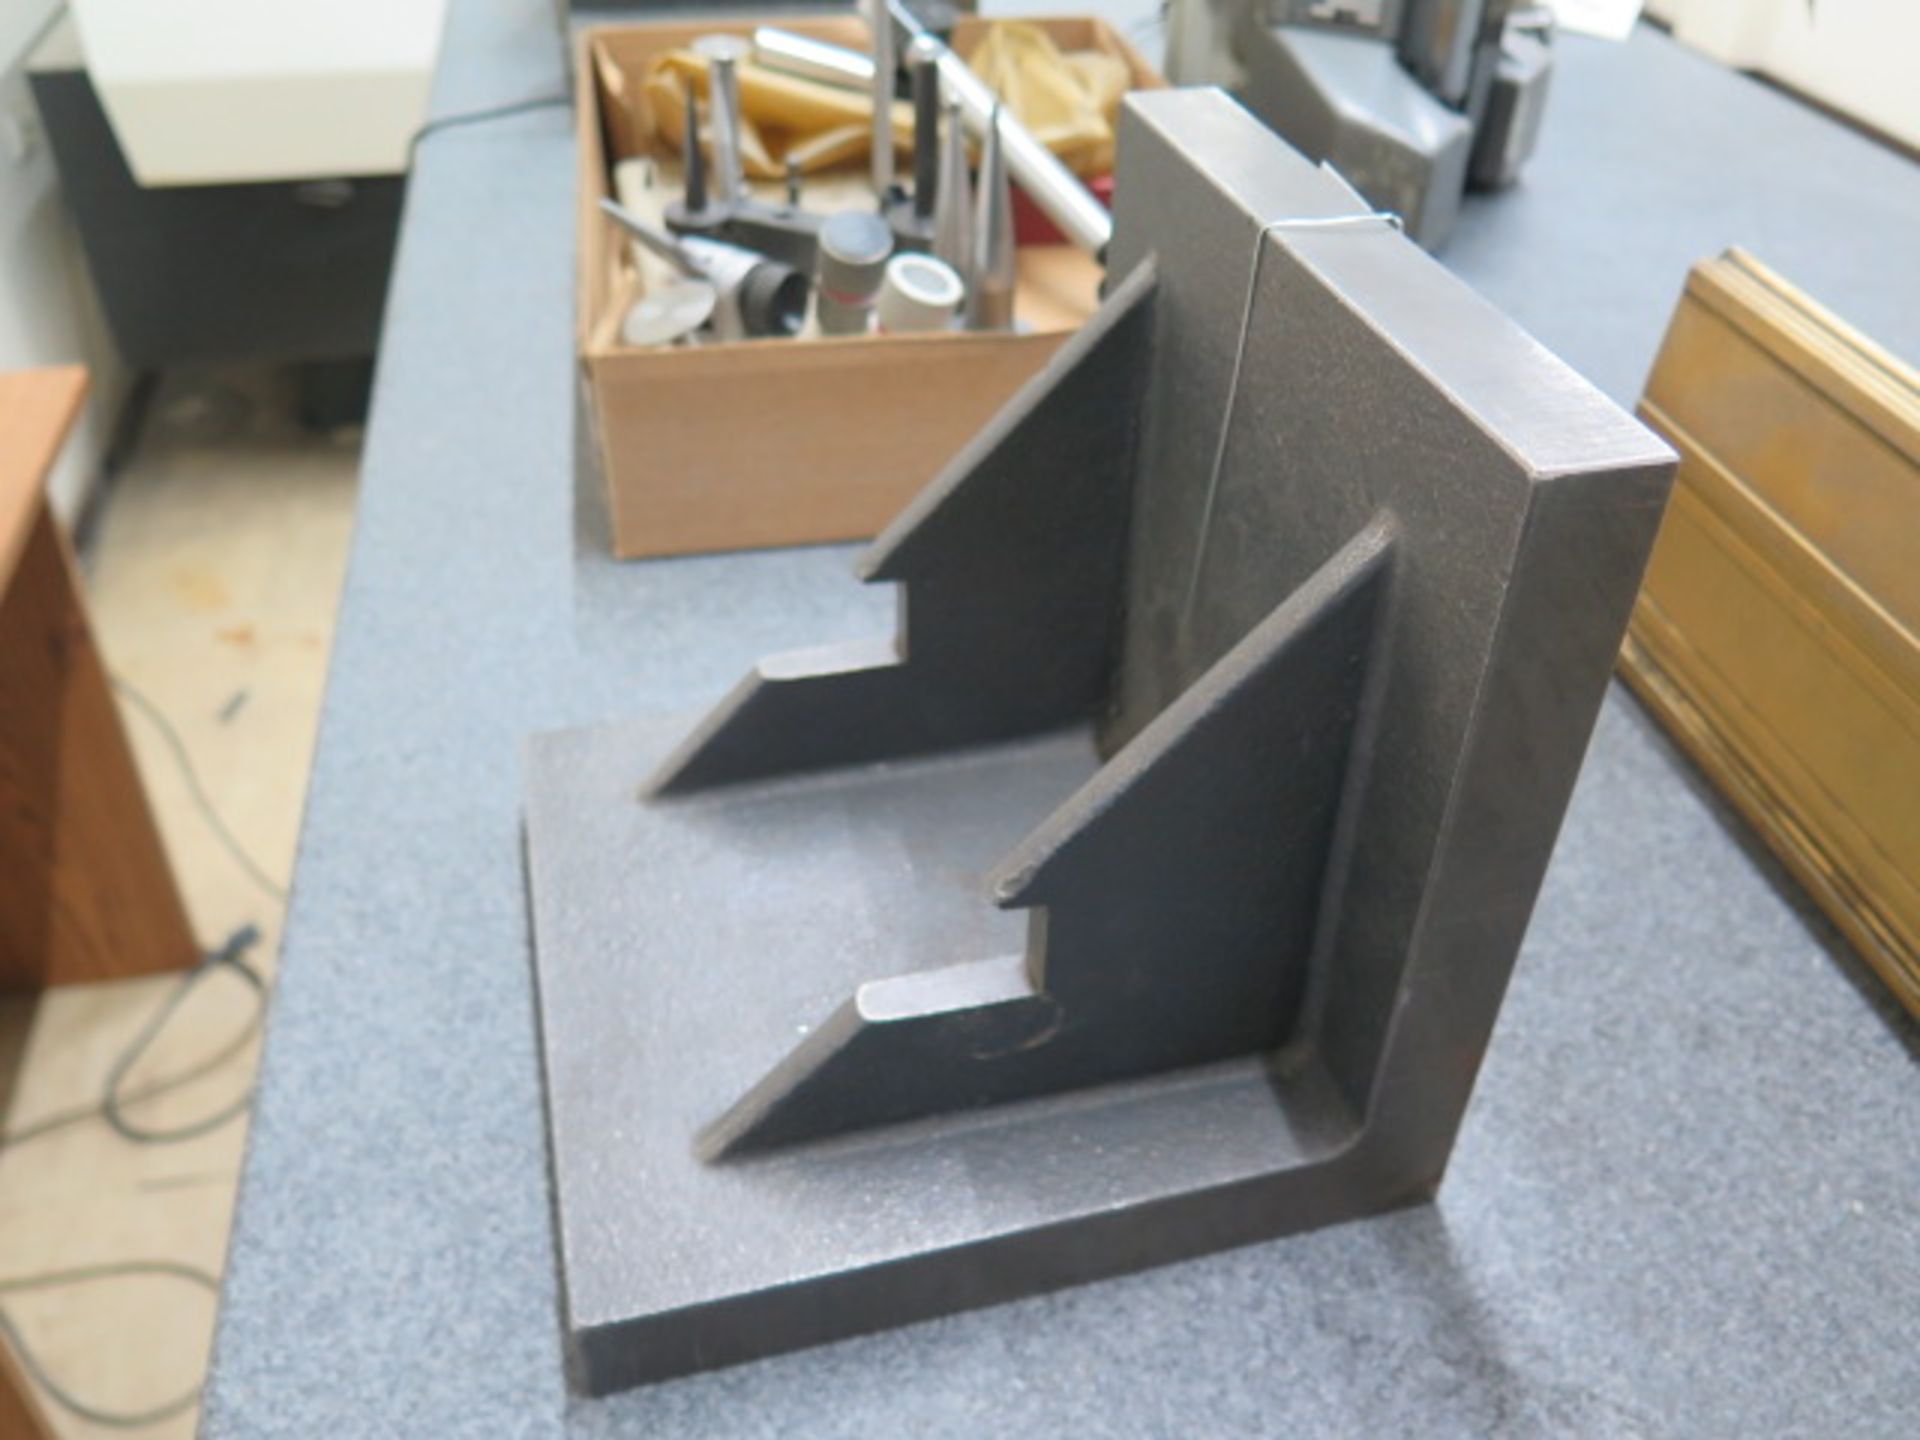 8" x 8" x 8" Angle Plate (SOLD AS-IS - NO WARRANTY) - Image 2 of 2